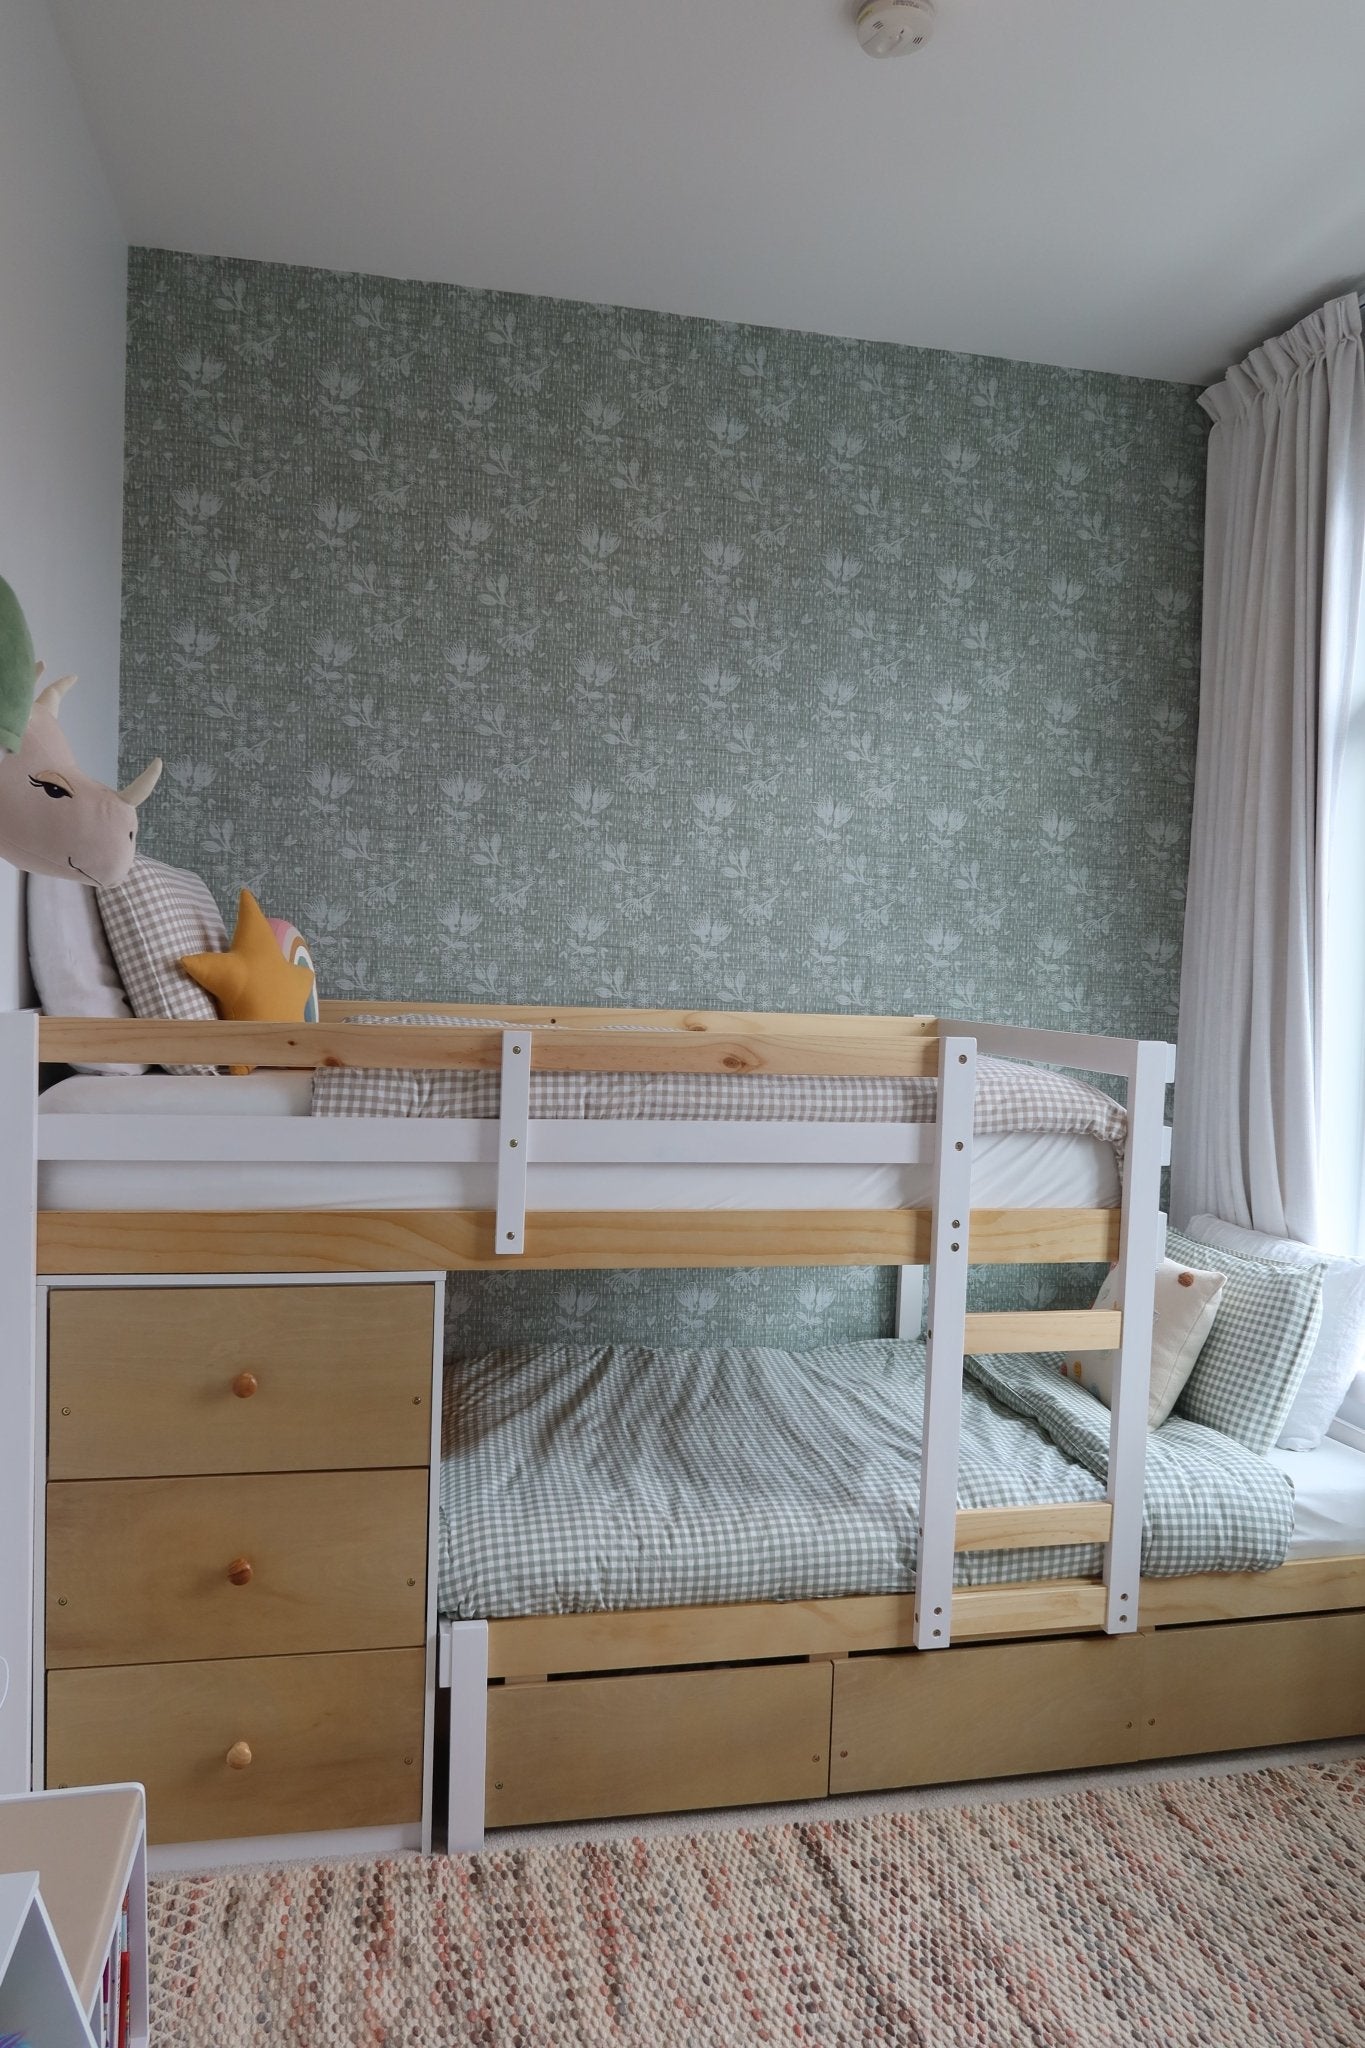 Bright and airy child's bedroom with pine bunk bed, forest green floral wallpaper, and a window draped with sheer white curtains.